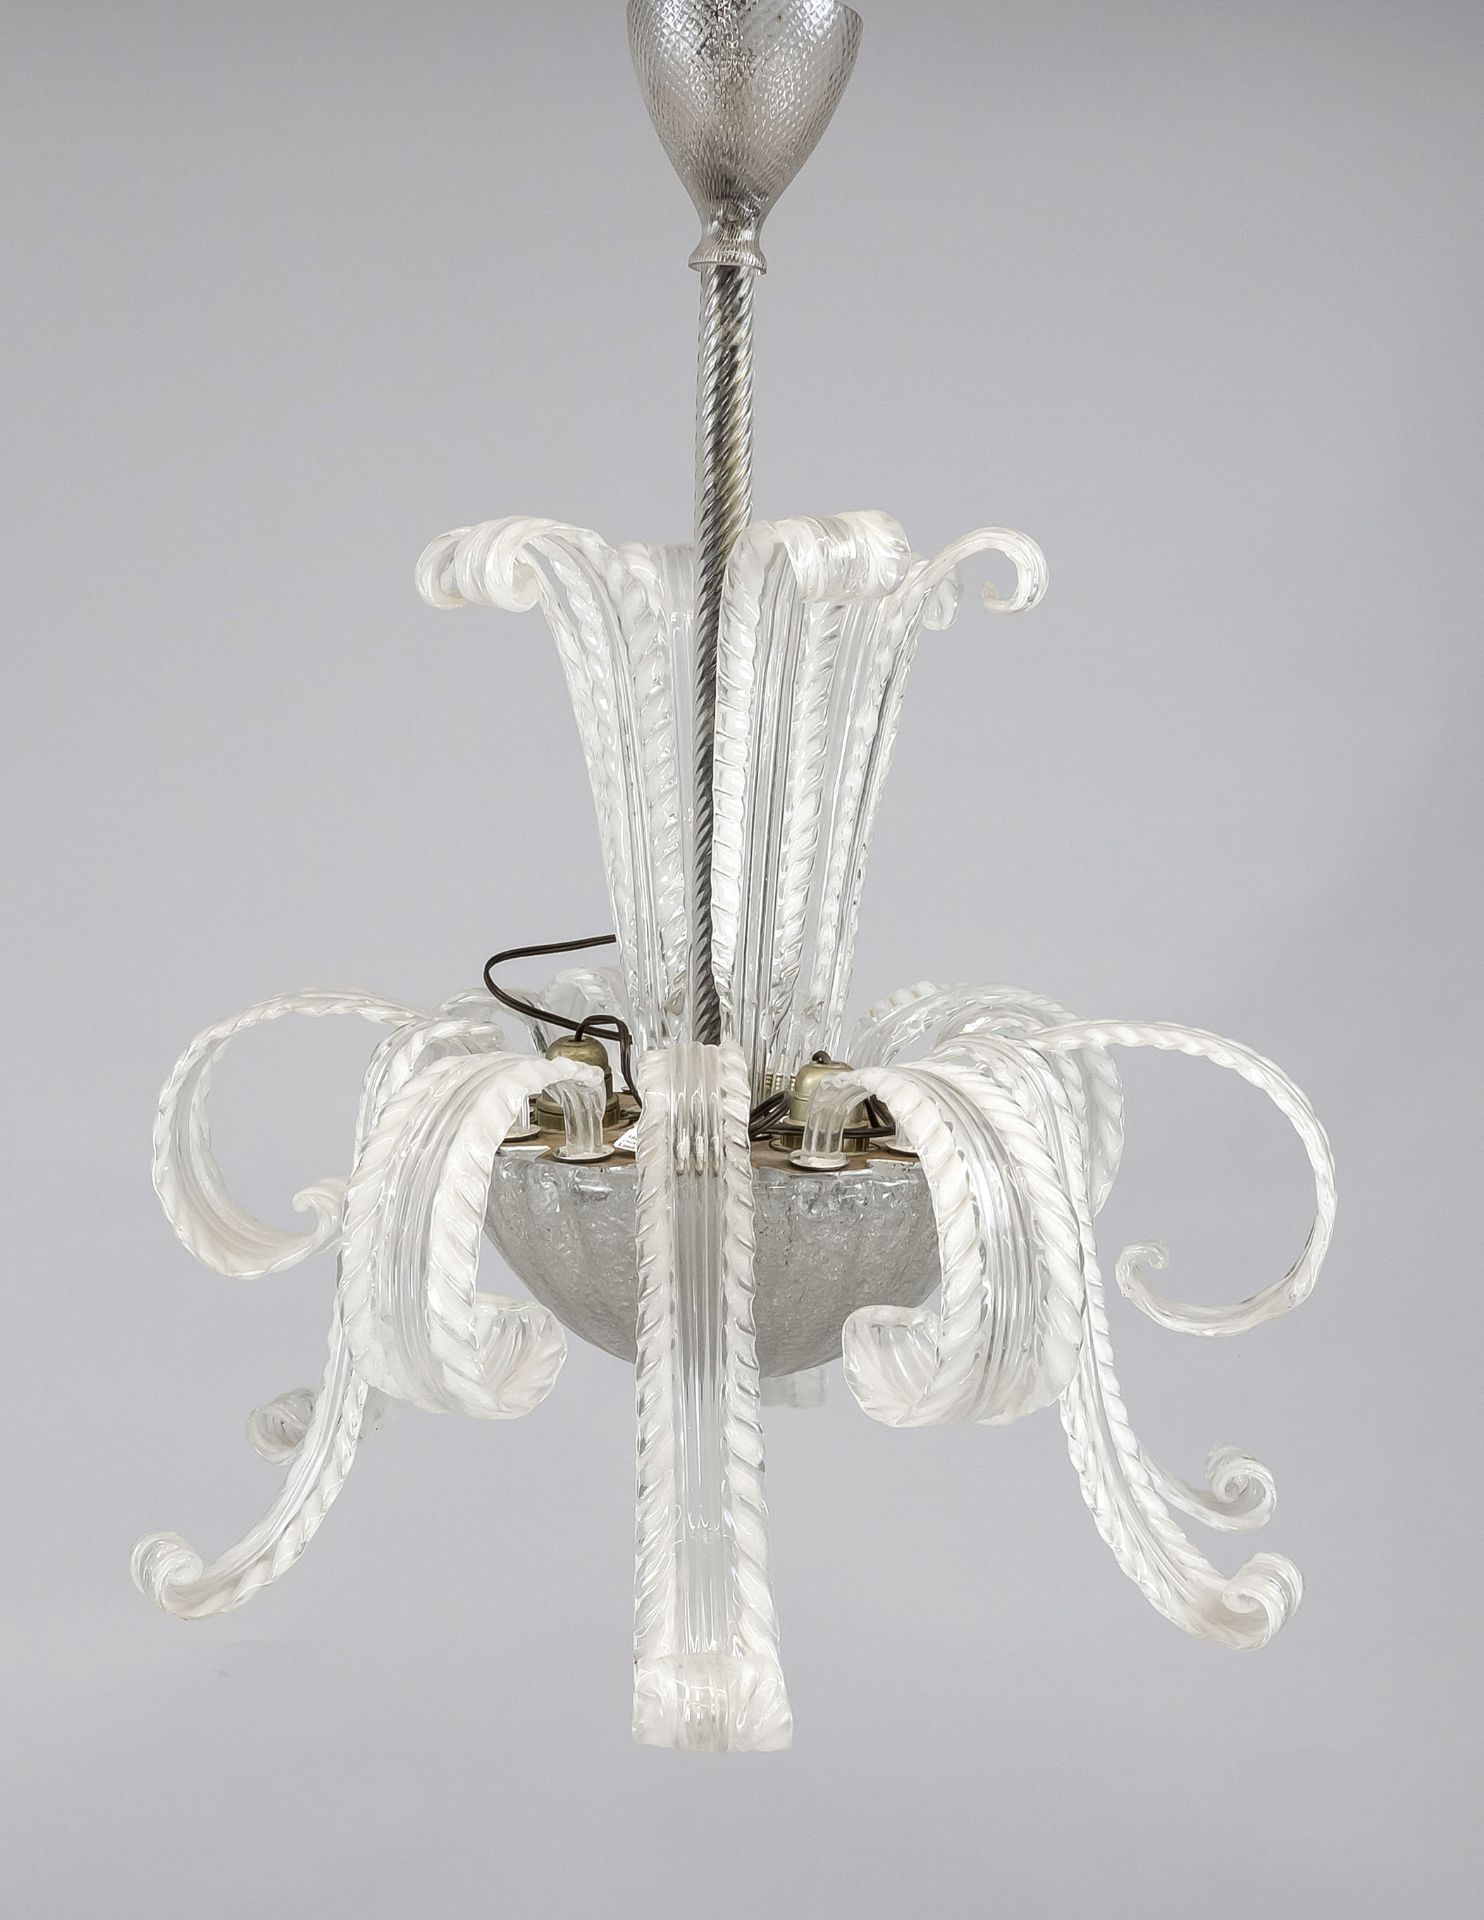 Murano ceiling chandelier, Italy 20th century, console with inserted decorative elements in the form